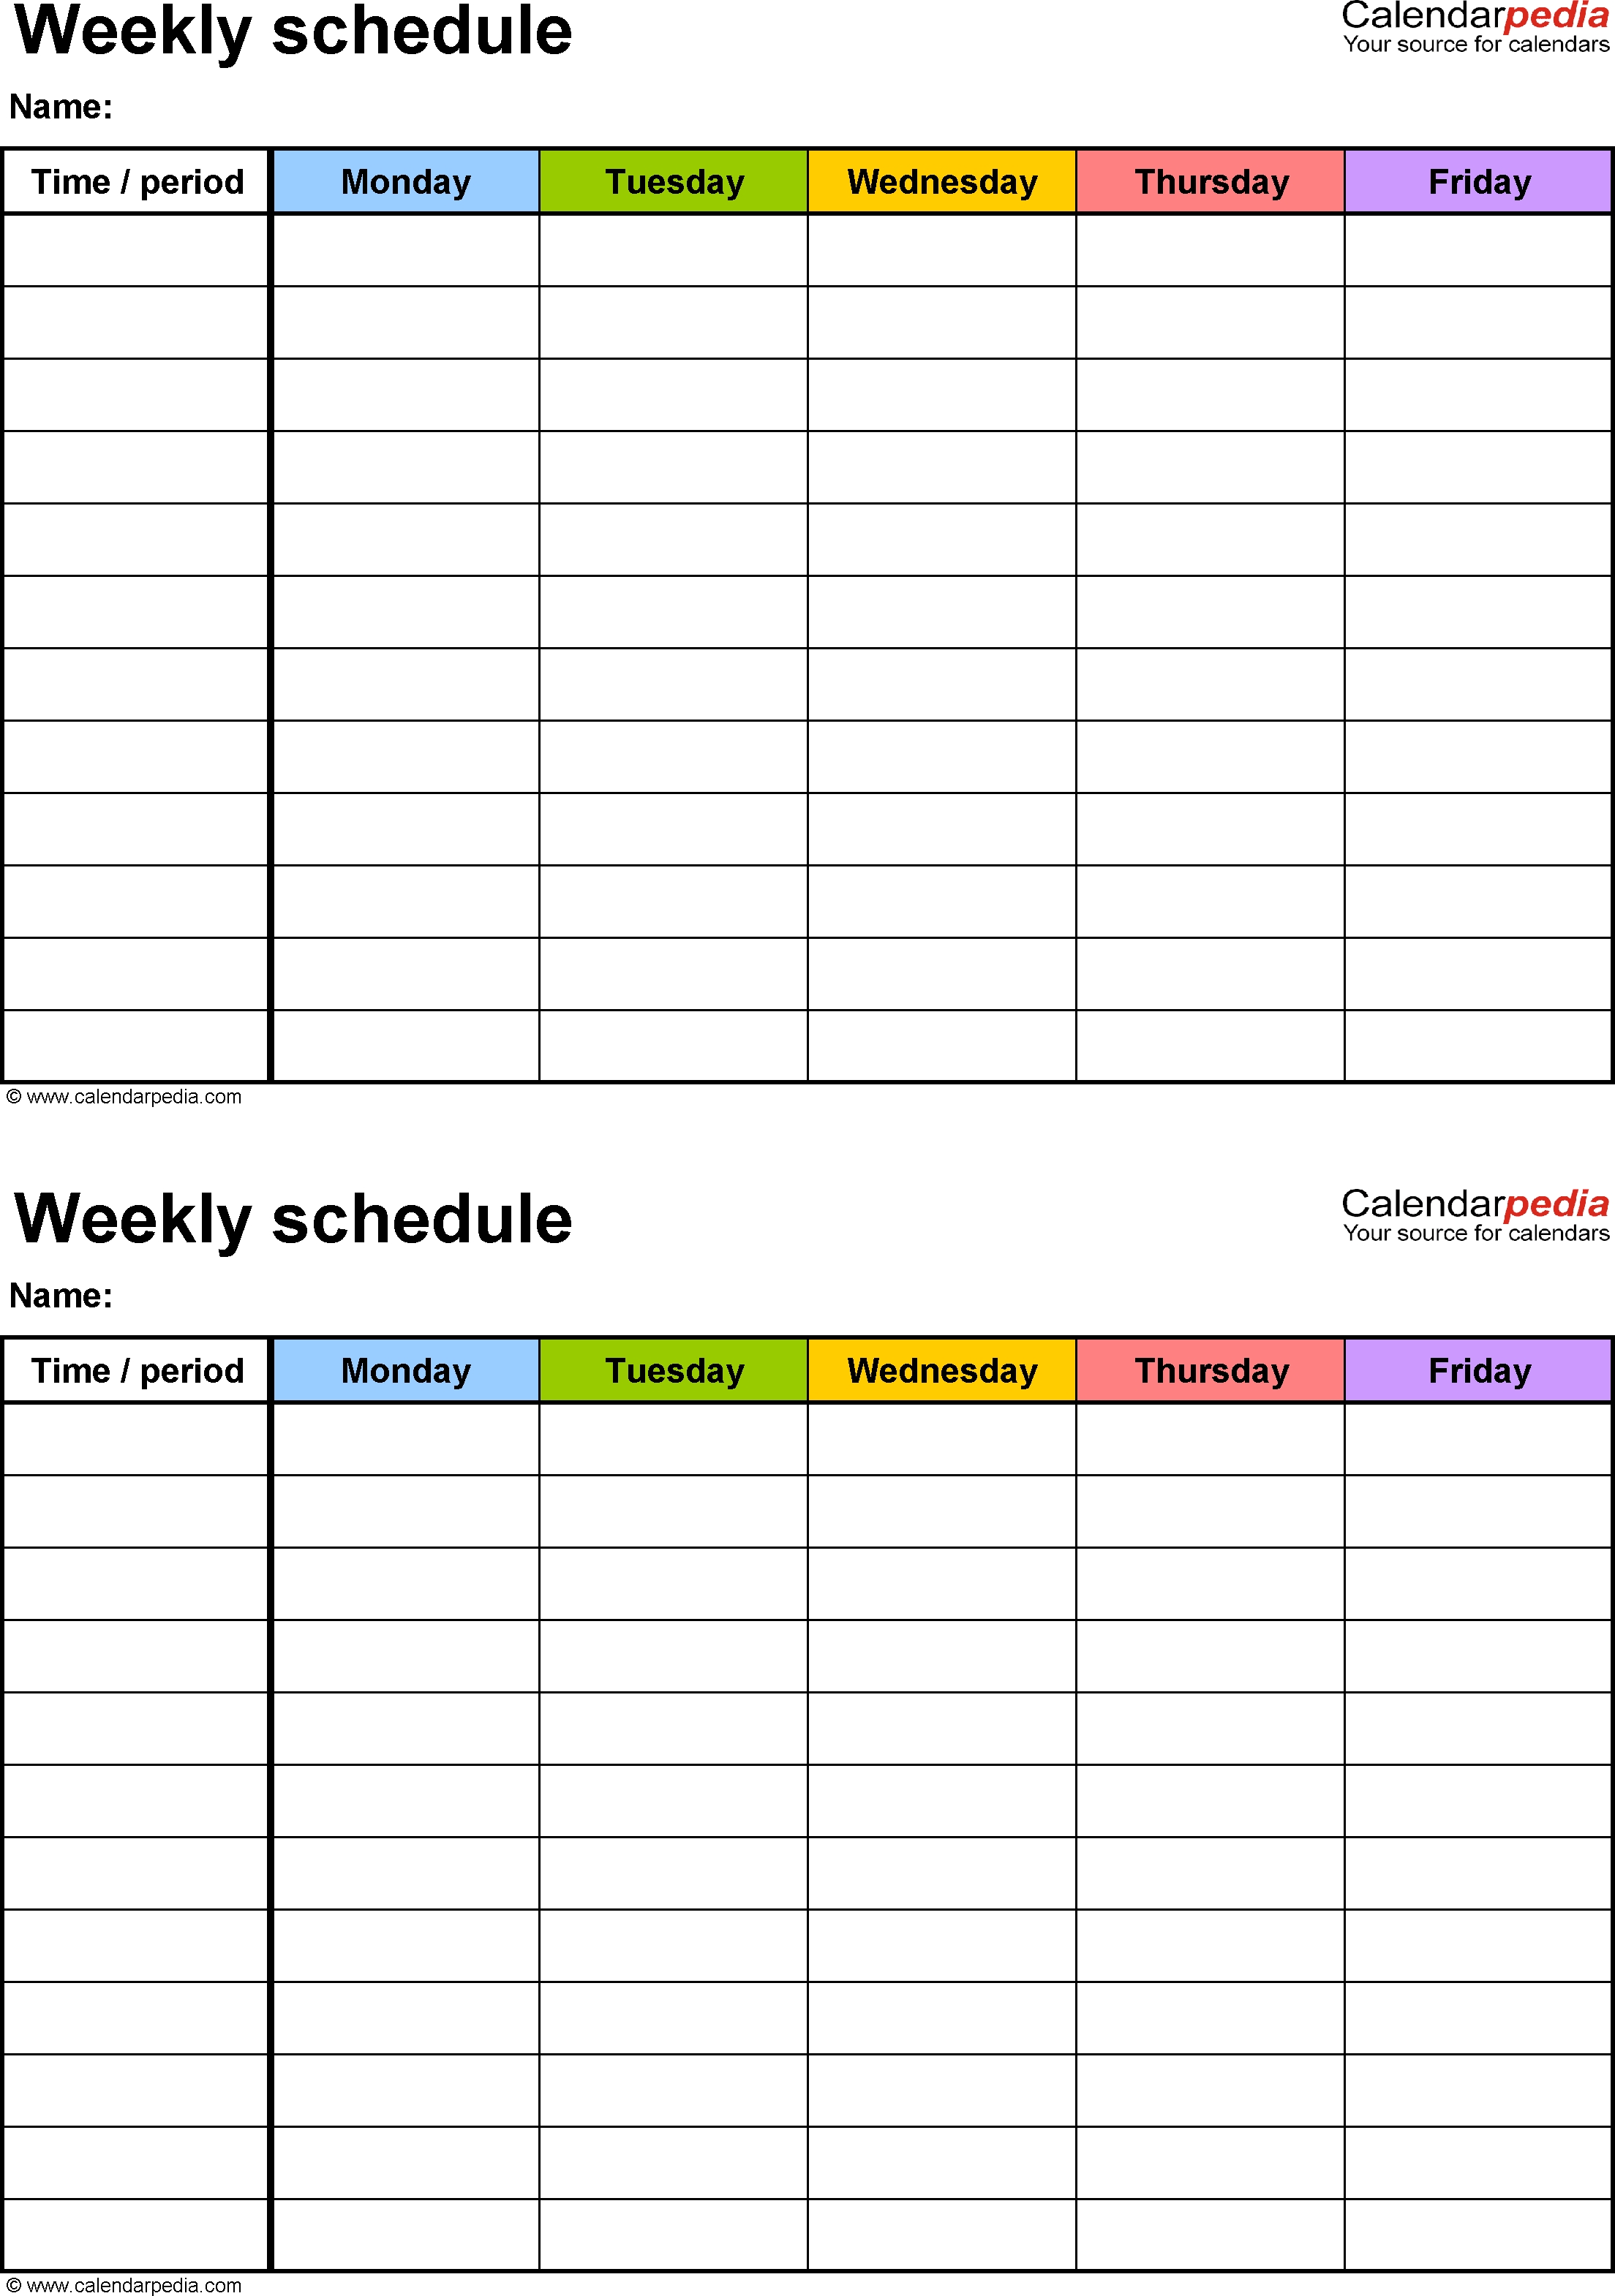 Free Weekly Schedule Templates For Word - 18 Templates with regard to 5 Day Calendar Template Word